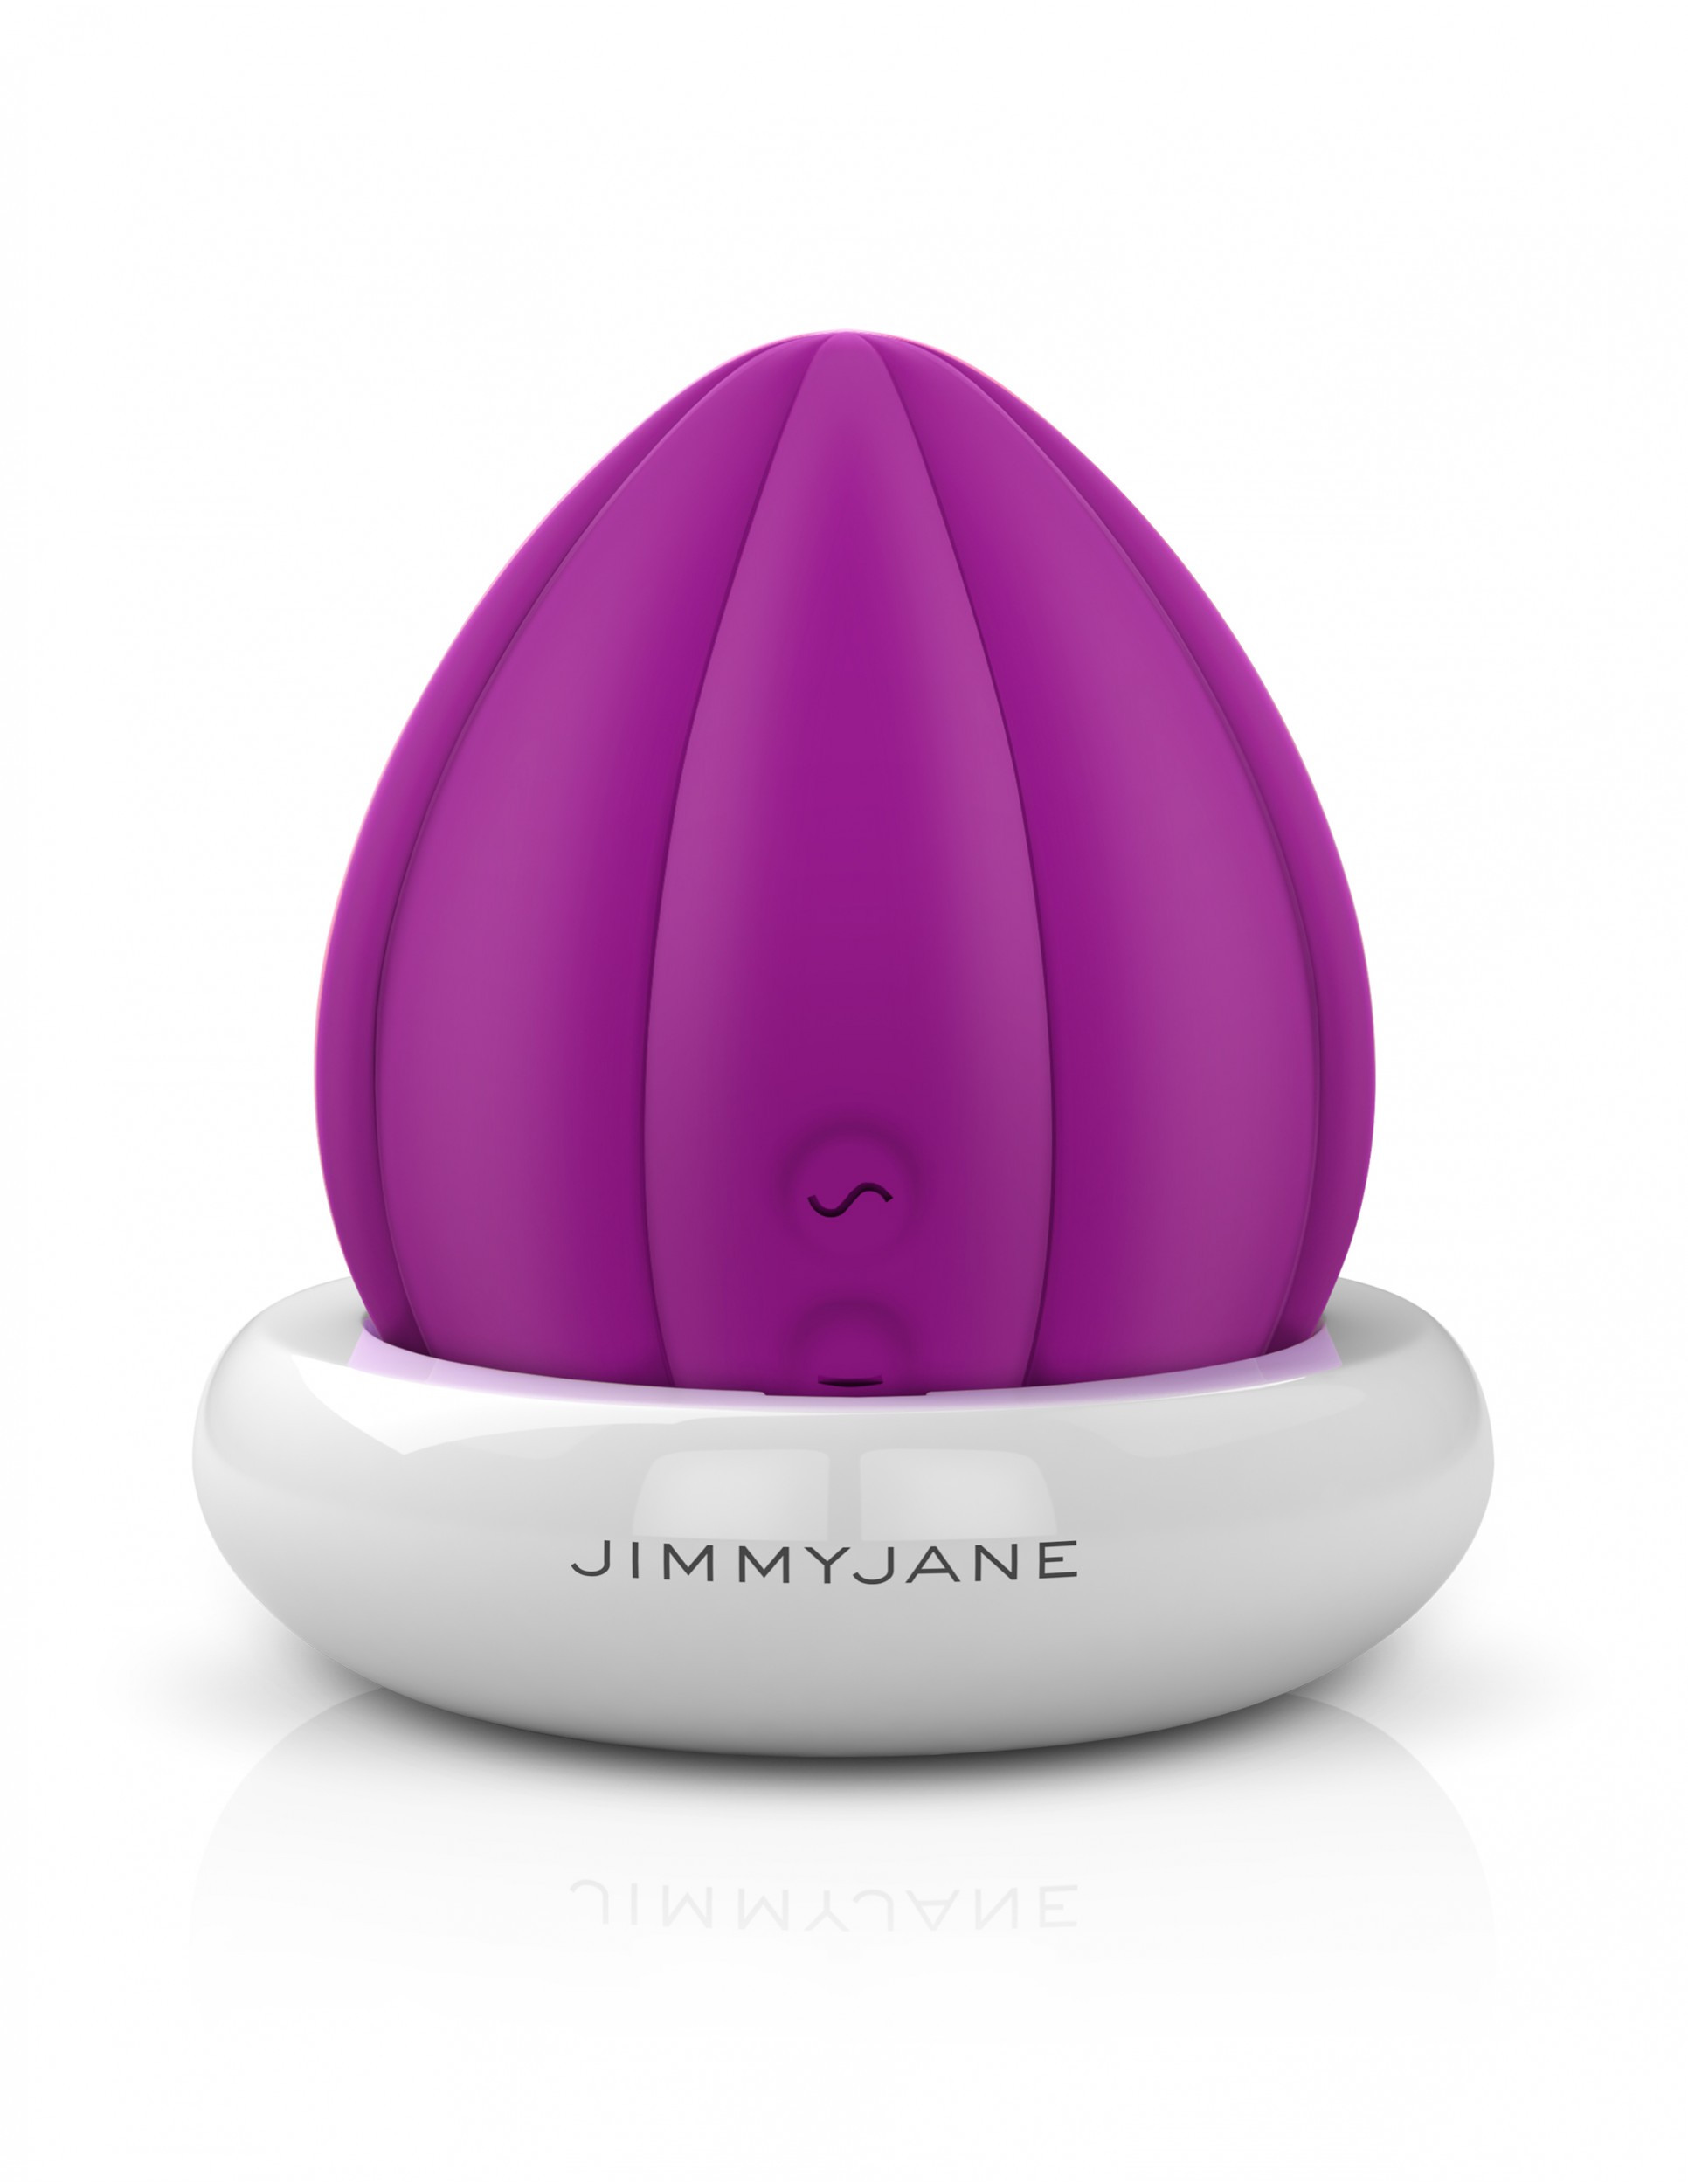 Love Pods by Jimmy Jane Review